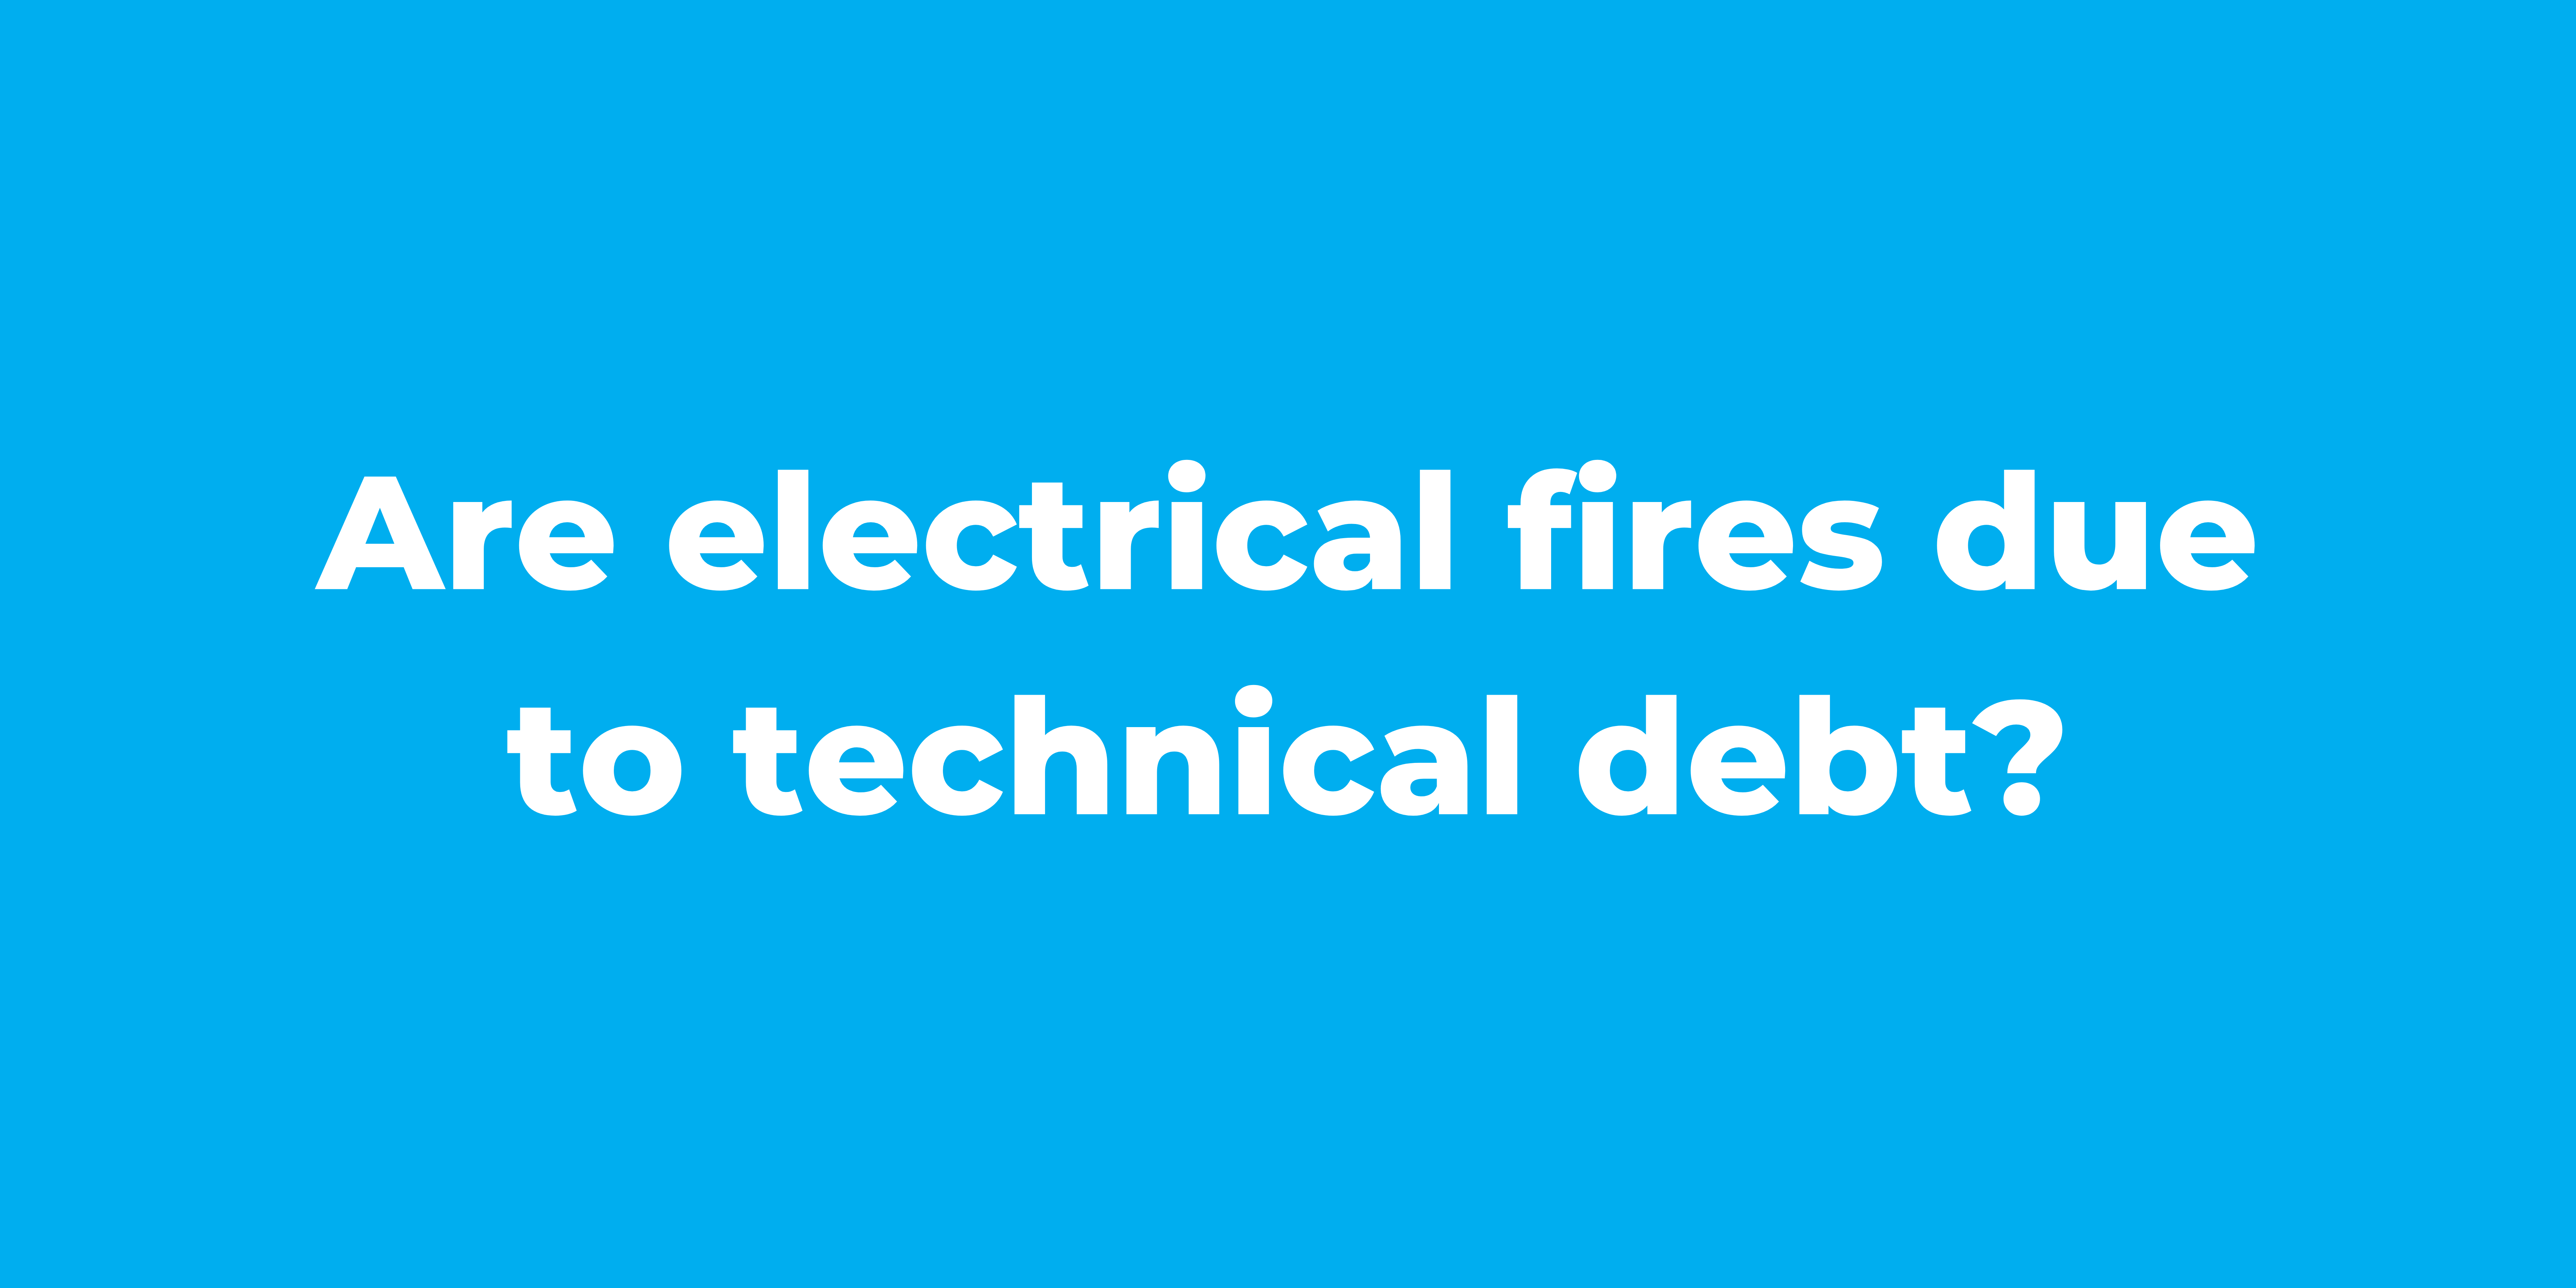 Are electrical fires due to technical debt?